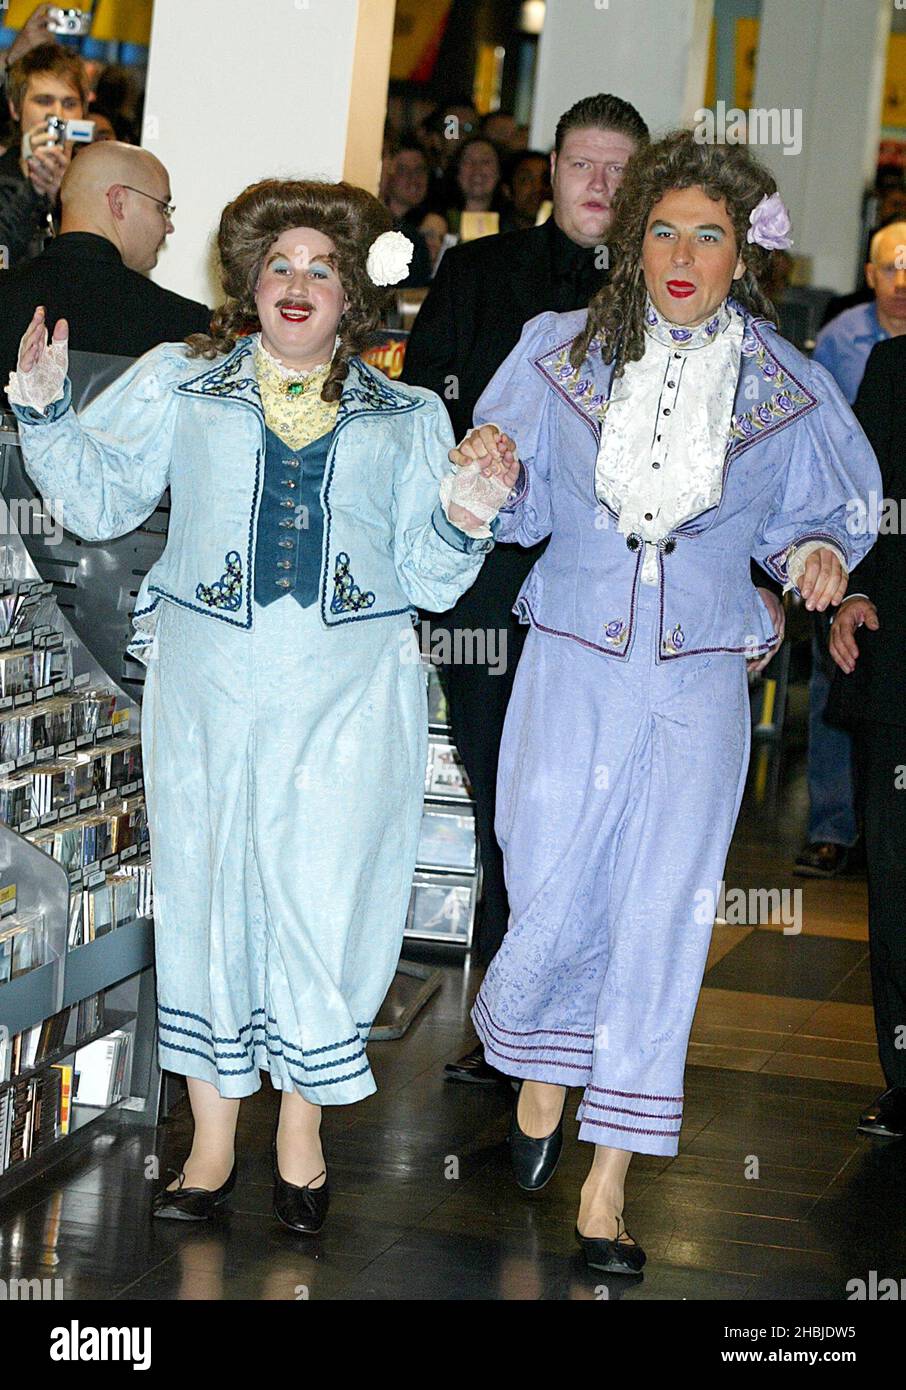 Actor Matt Lucas and David Walliams attend a signing & photocall for their Little Britain Series 1 DVD at HMV Oxford Street on October 11, 2004 in London. Stock Photo